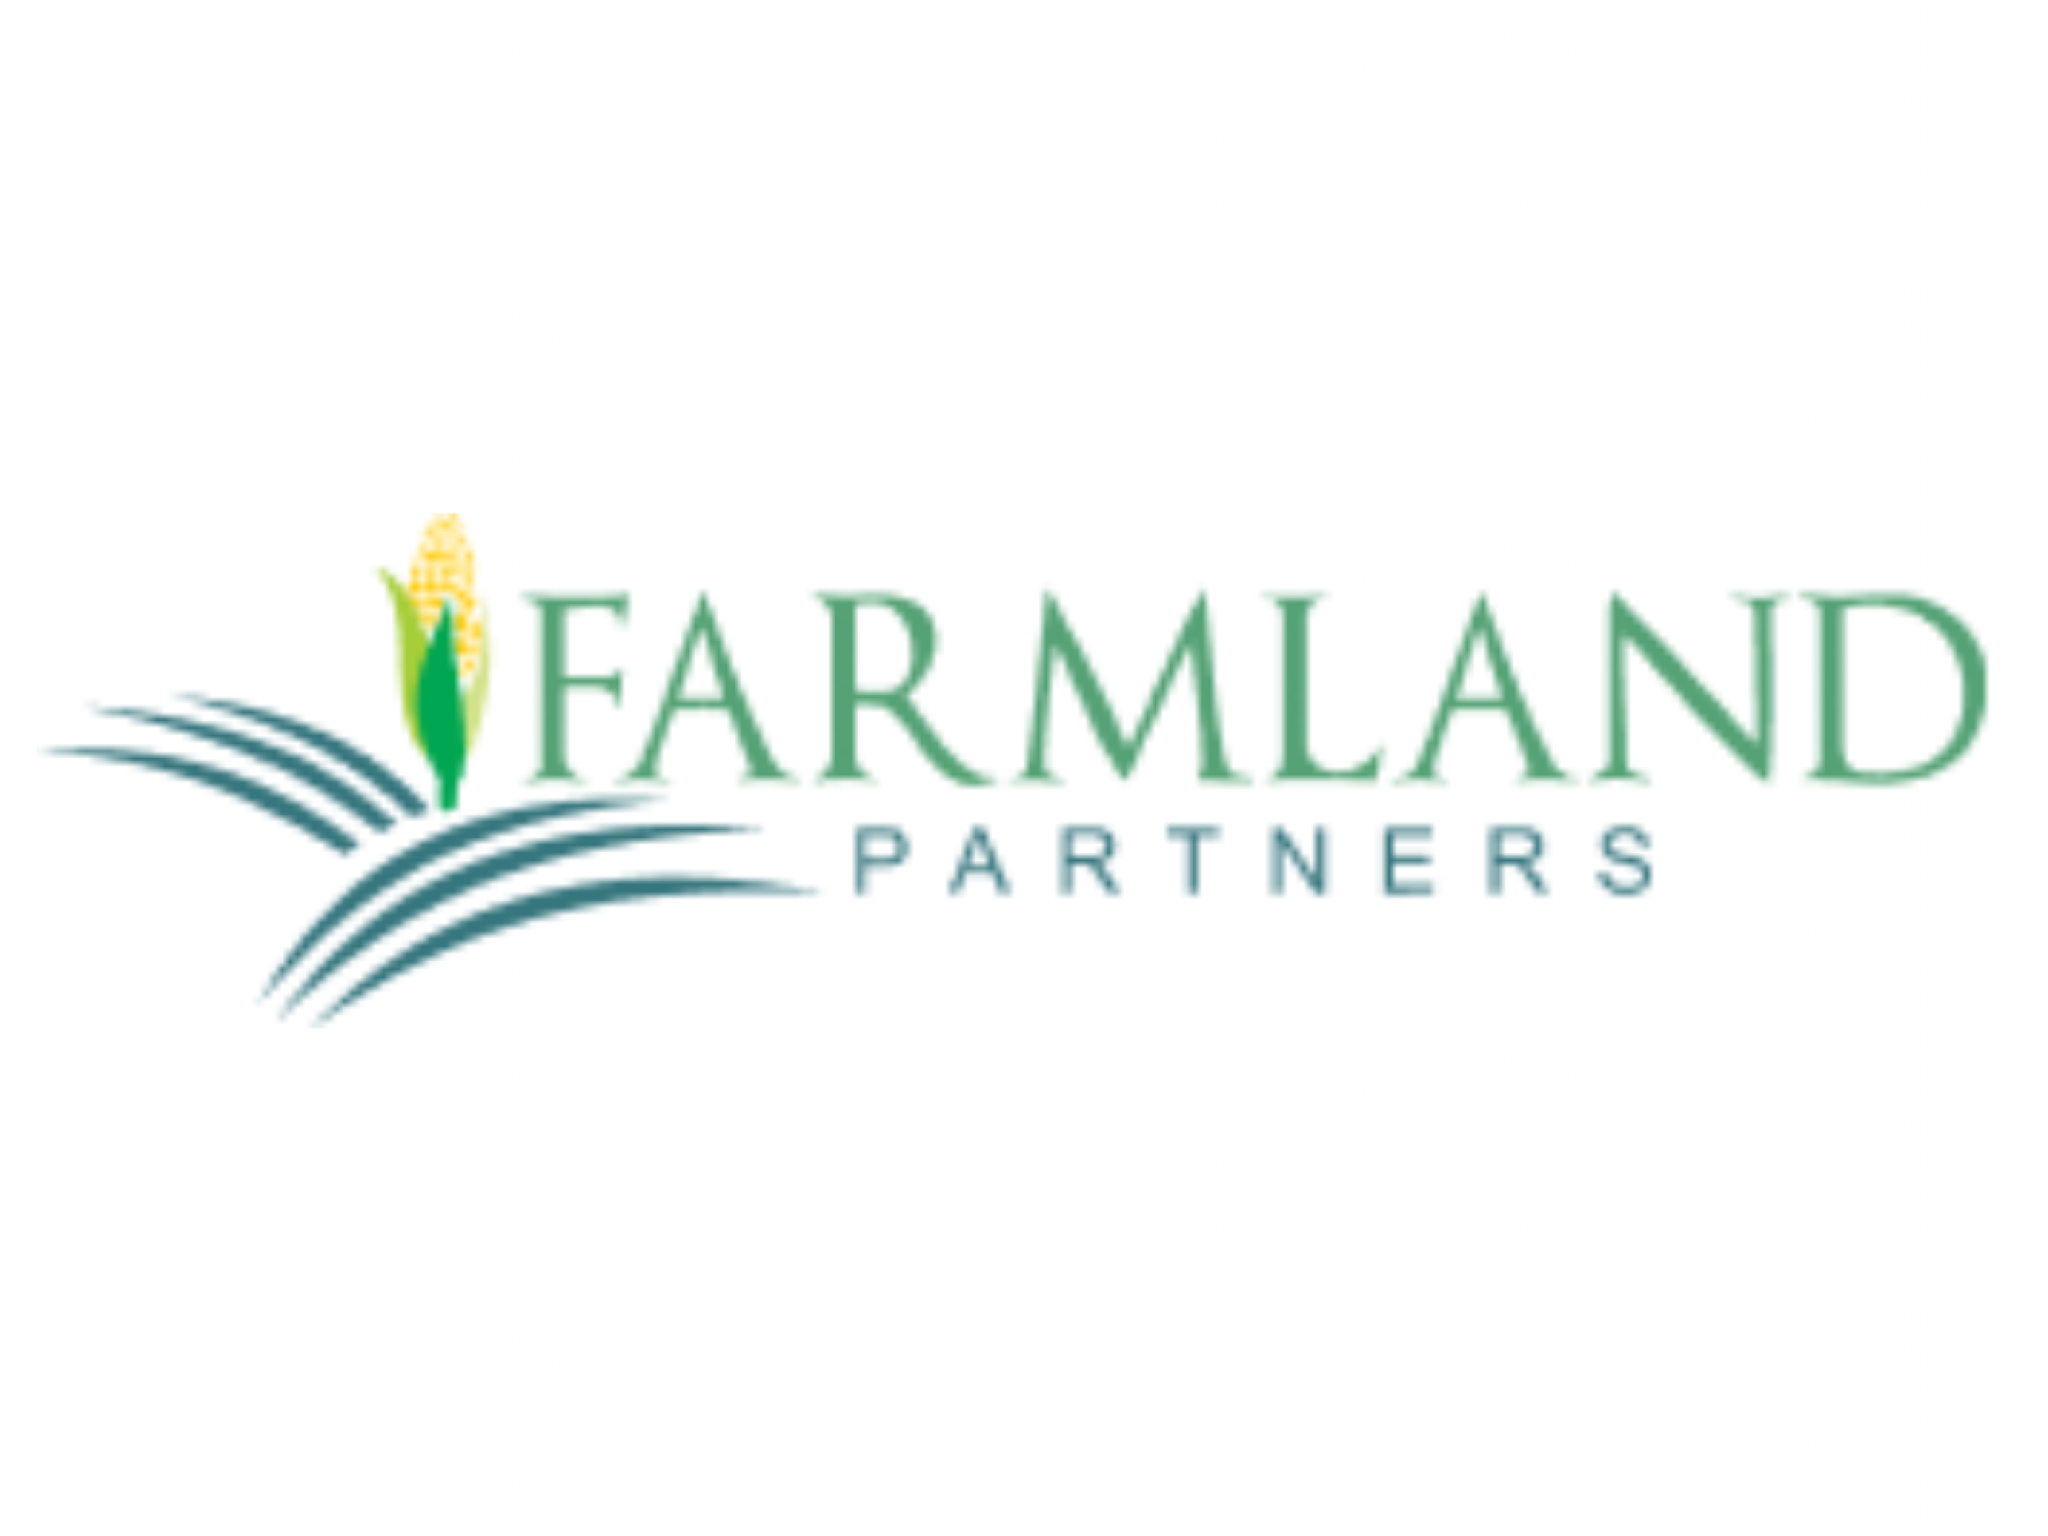  farmland-partners-revamps-portfolio-with-strategic-dispositions-and-farm-acquisition 